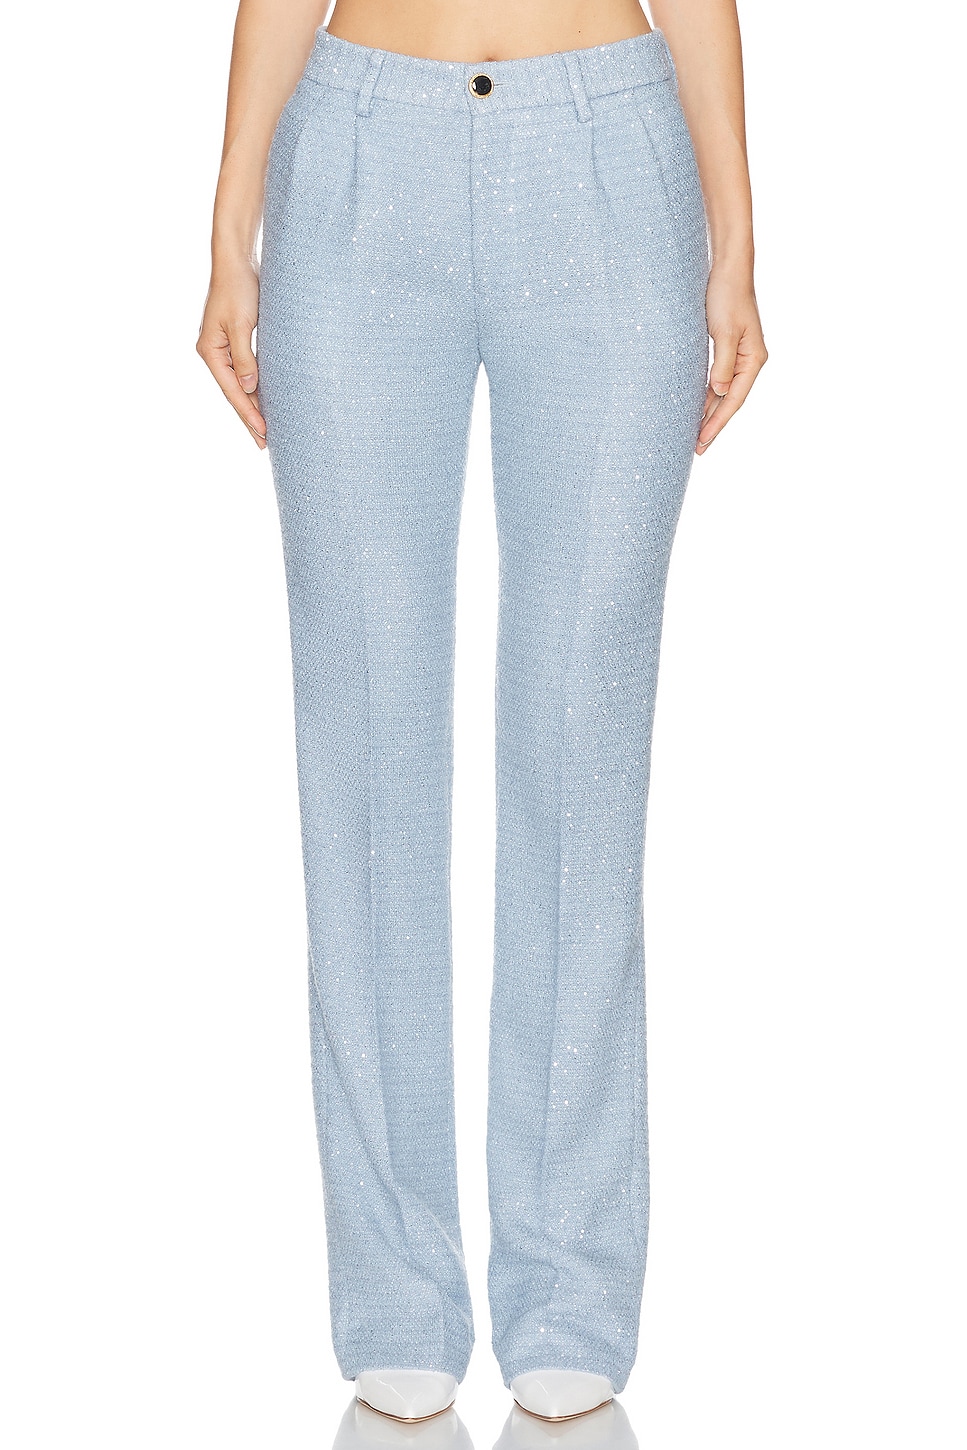 Image 1 of Alessandra Rich Tweed Trouser in Light Blue